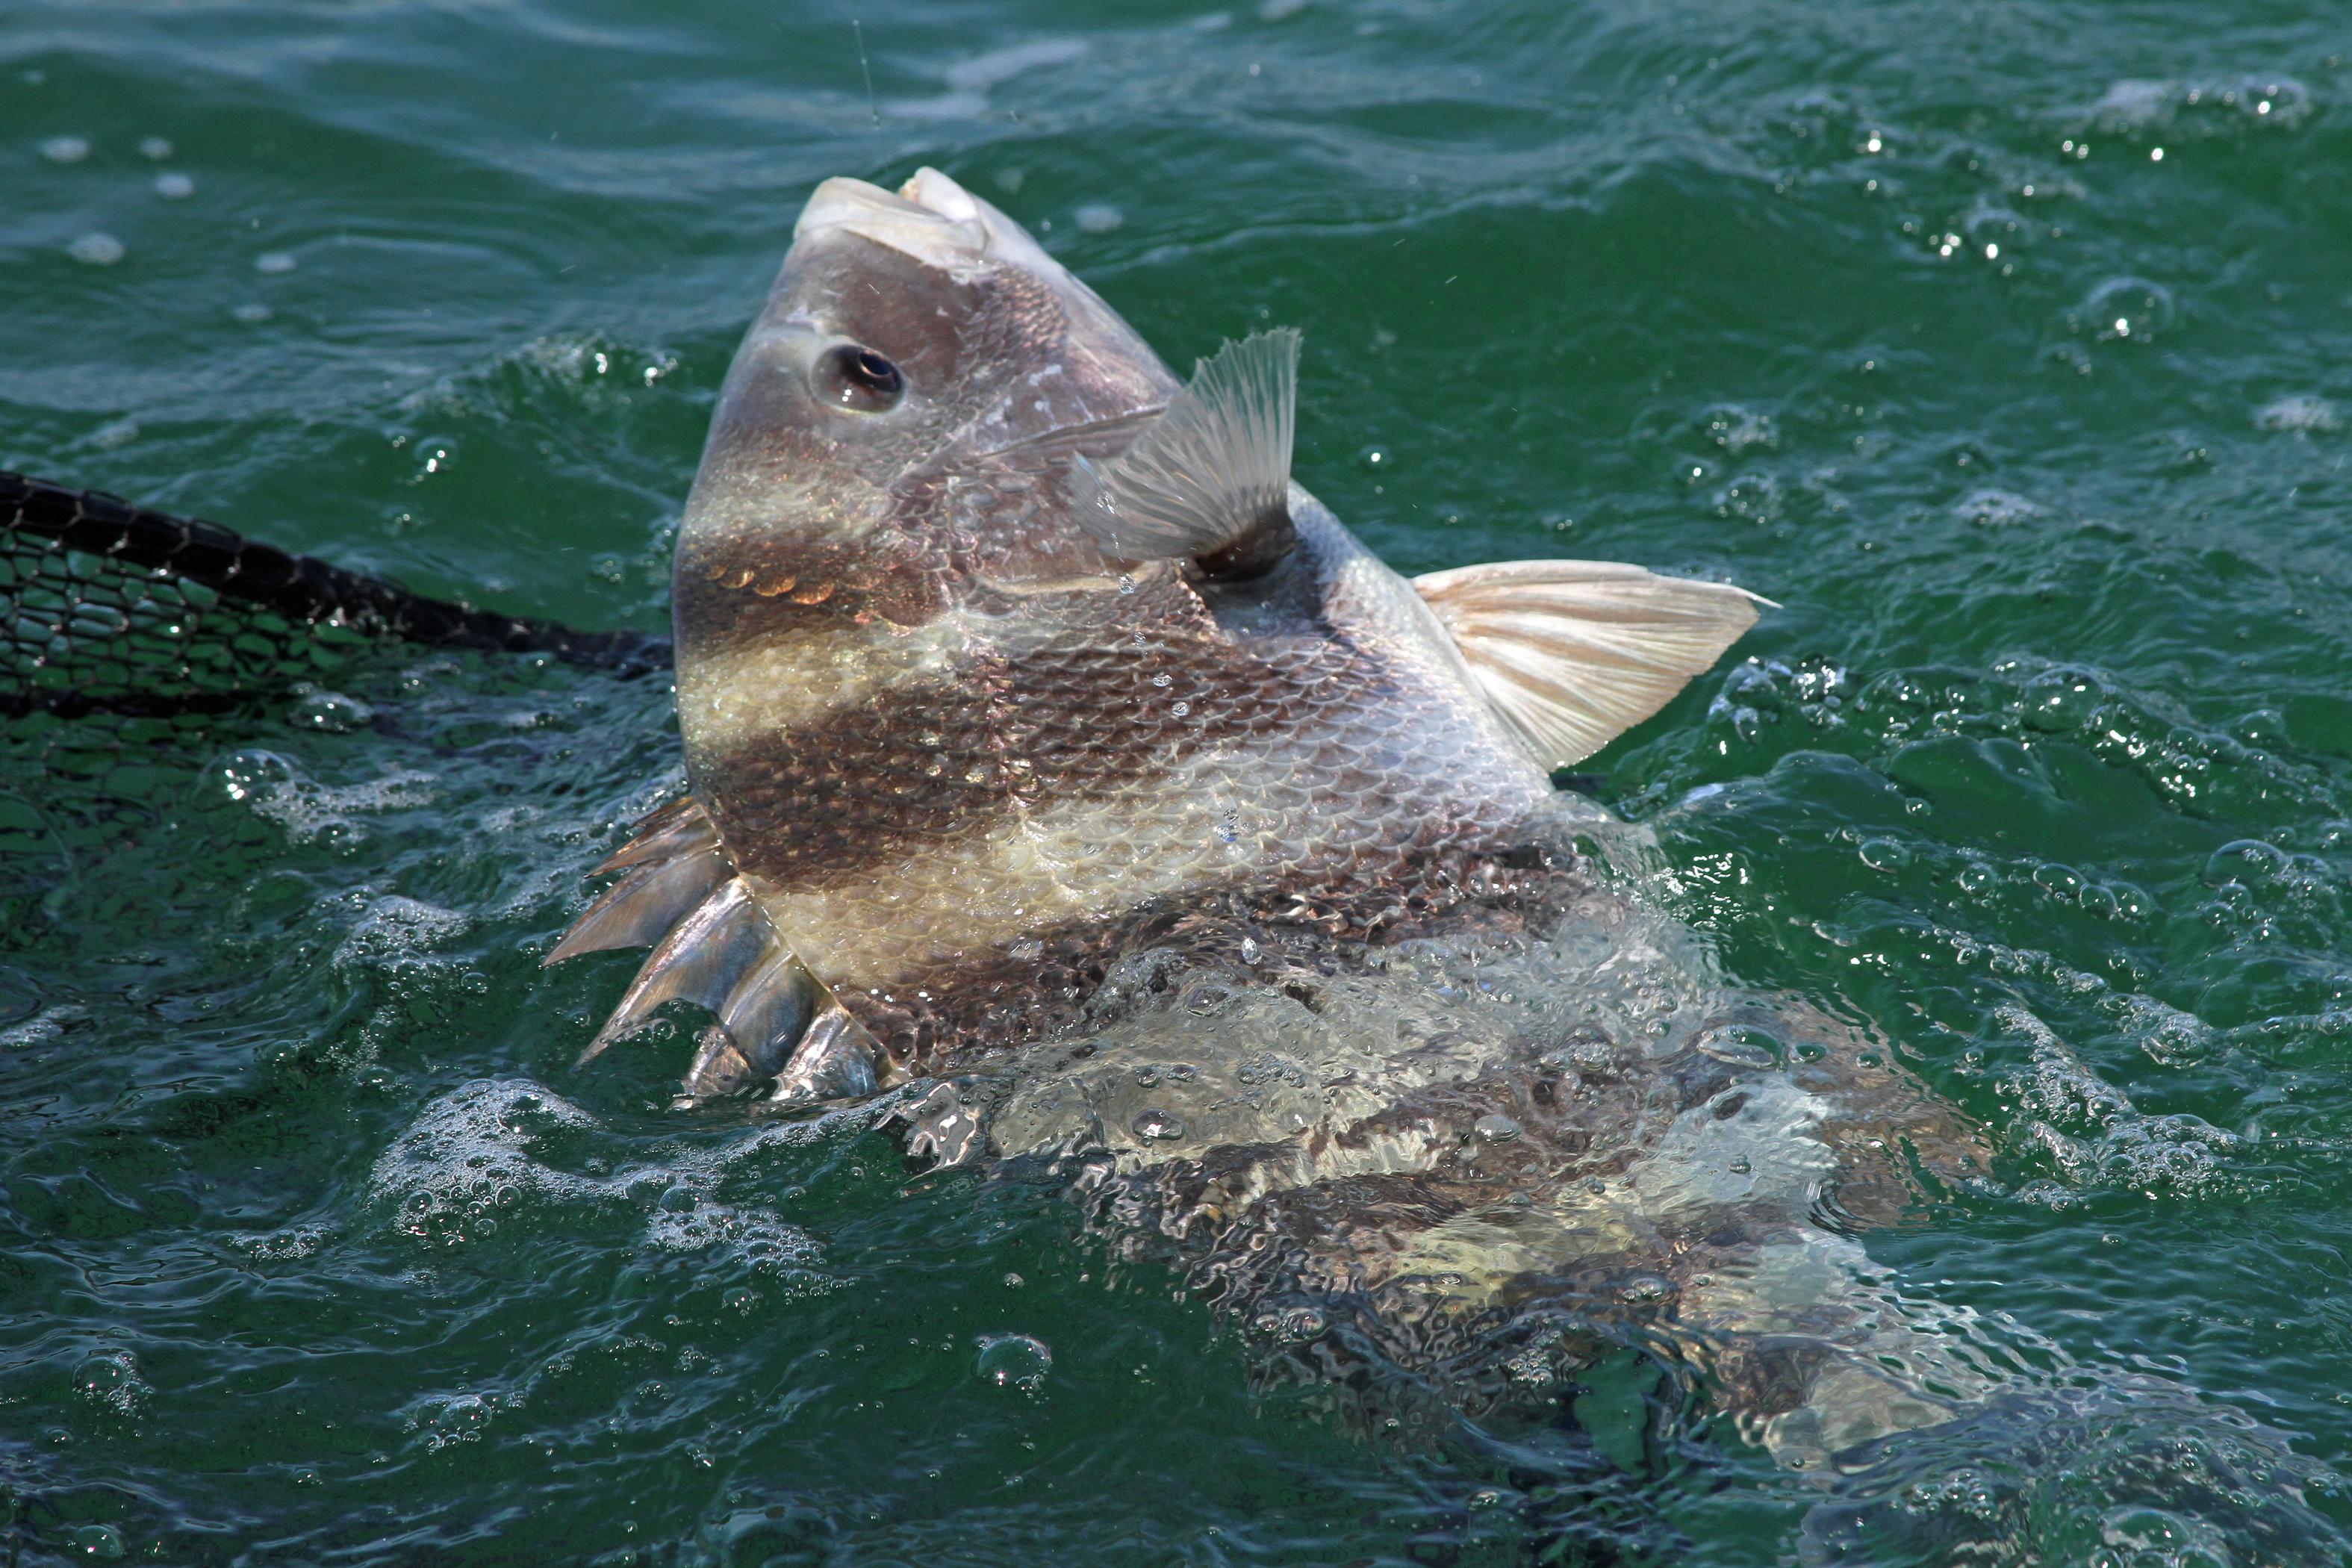 Sheepshead Fishing: All You Need to Know